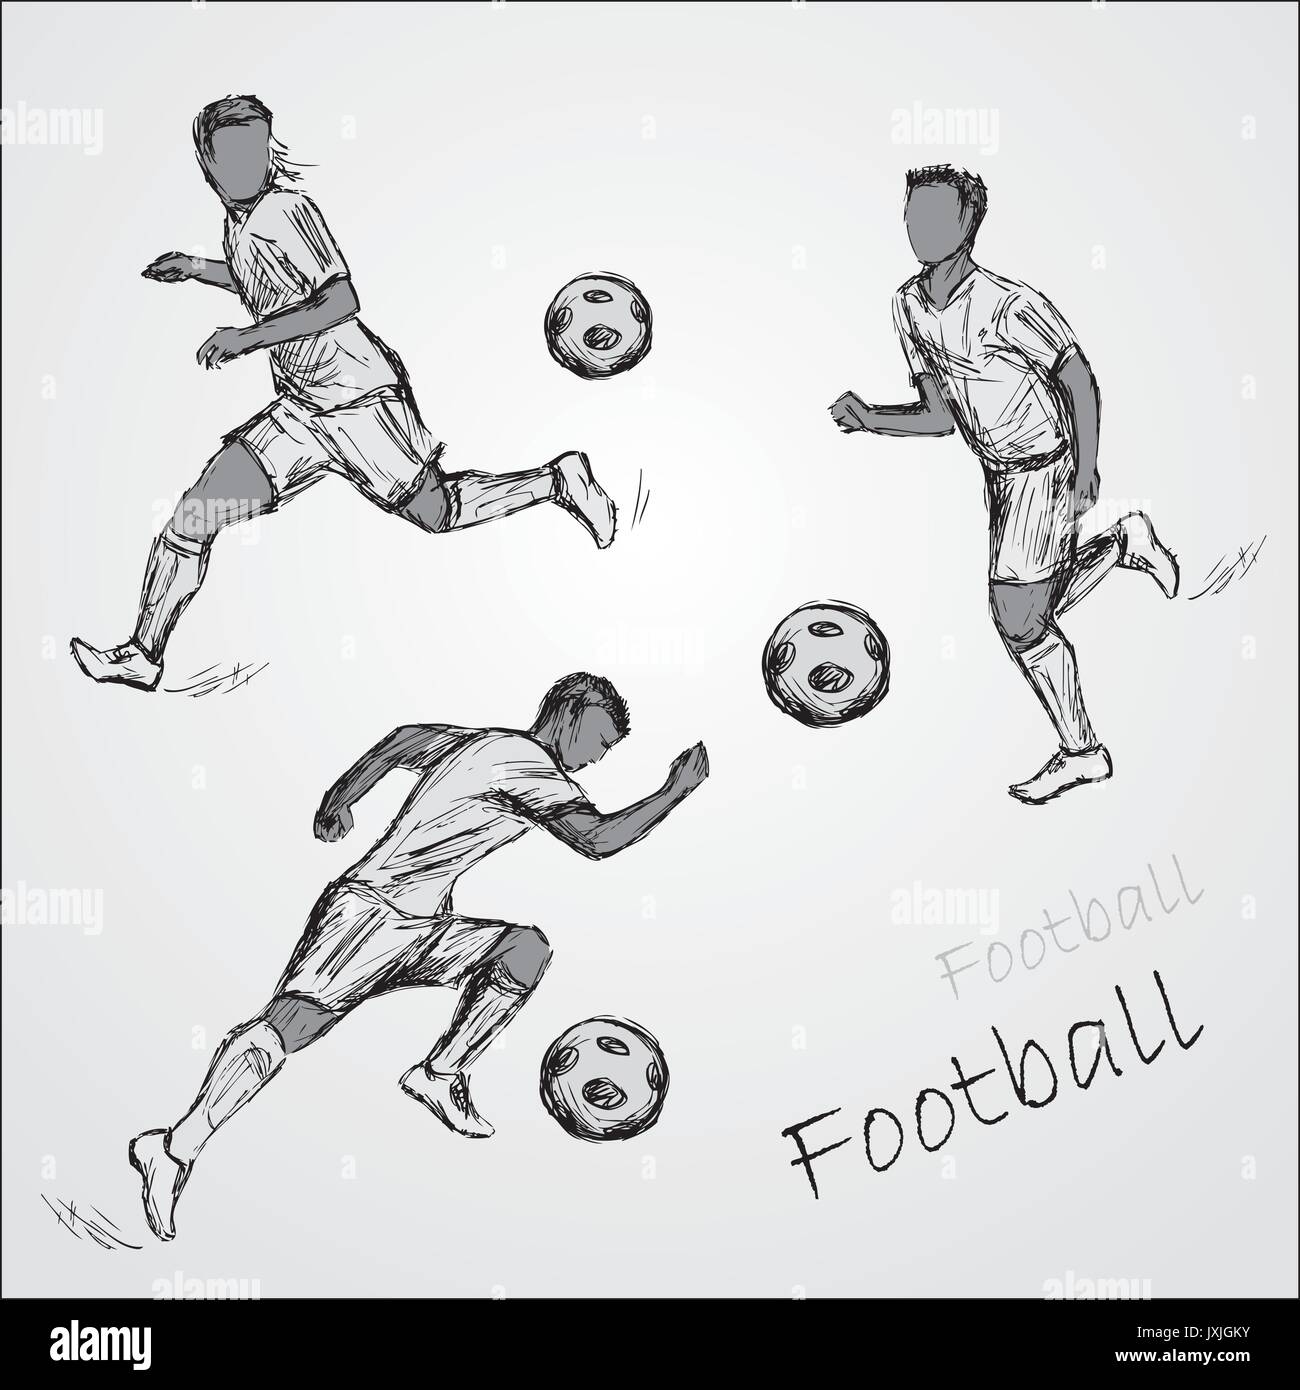 4 Ways How to draw a Soccer Ball and football Step by Step